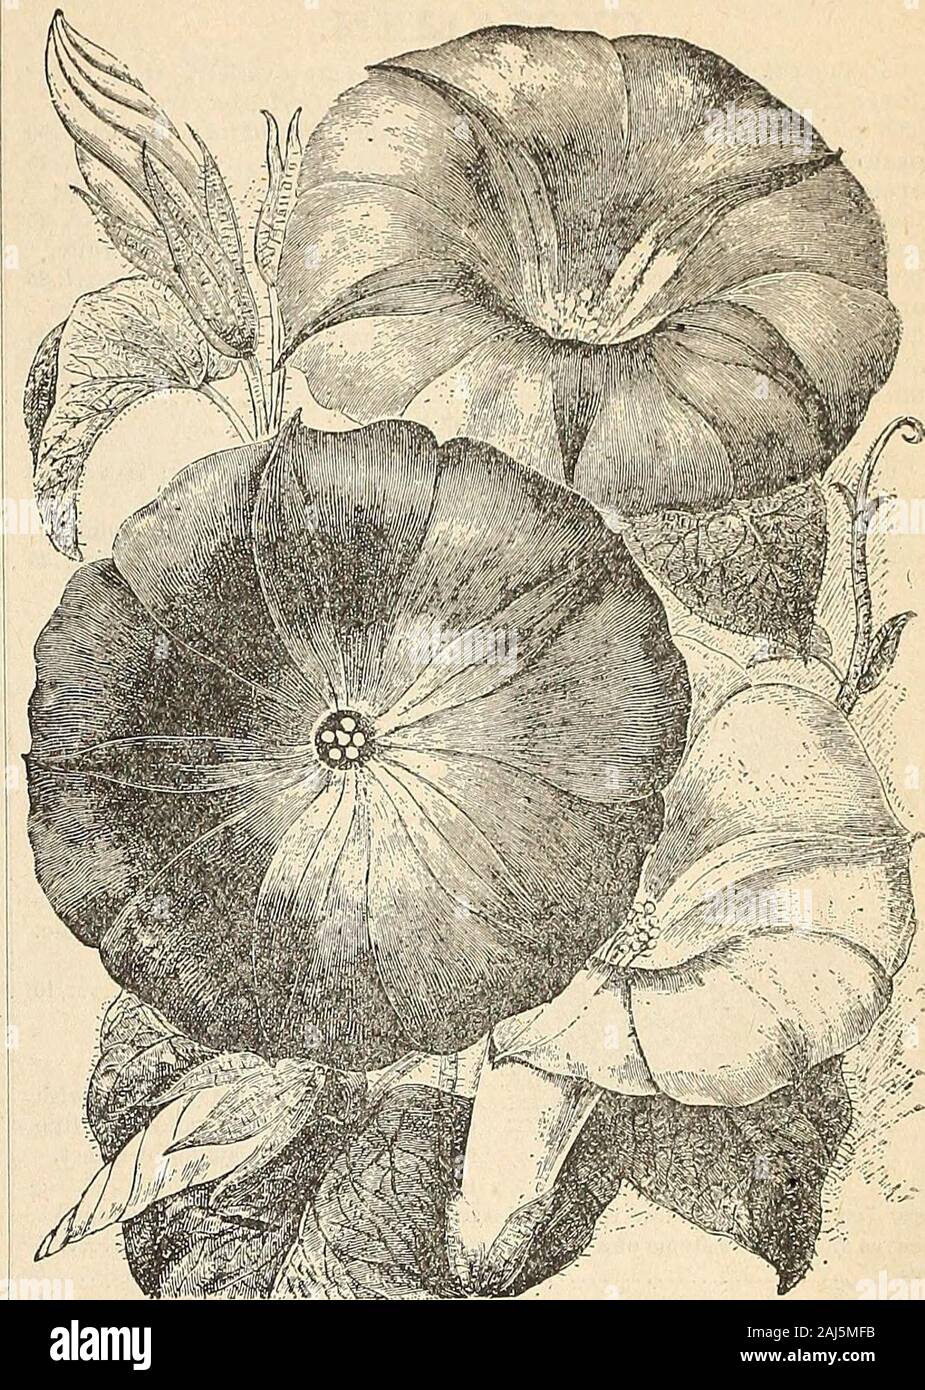 Horitucultural guide : spring 1892 . nd difficult to raise, but which can besuccessfully grown when sown in open air in May, in a dry, sunny position.H. II. P.Dampleri—A magnificent shrub, flowers in clusters, drooping, pea-shaped, 4 inches in lengtli, of a brilliant scarlet with intense black spots in center ofeach flower 20 CLERODENDRON BALFOURII. Charming greenhouse climber, producing rich scarlet flowers from snow-white envelopes. It may also be trained on a trellis as a pot plant, withfine effect. II. H. B 25 COB^A. One of the finest of our summer climbers, with fine foliage and large, be Stock Photo